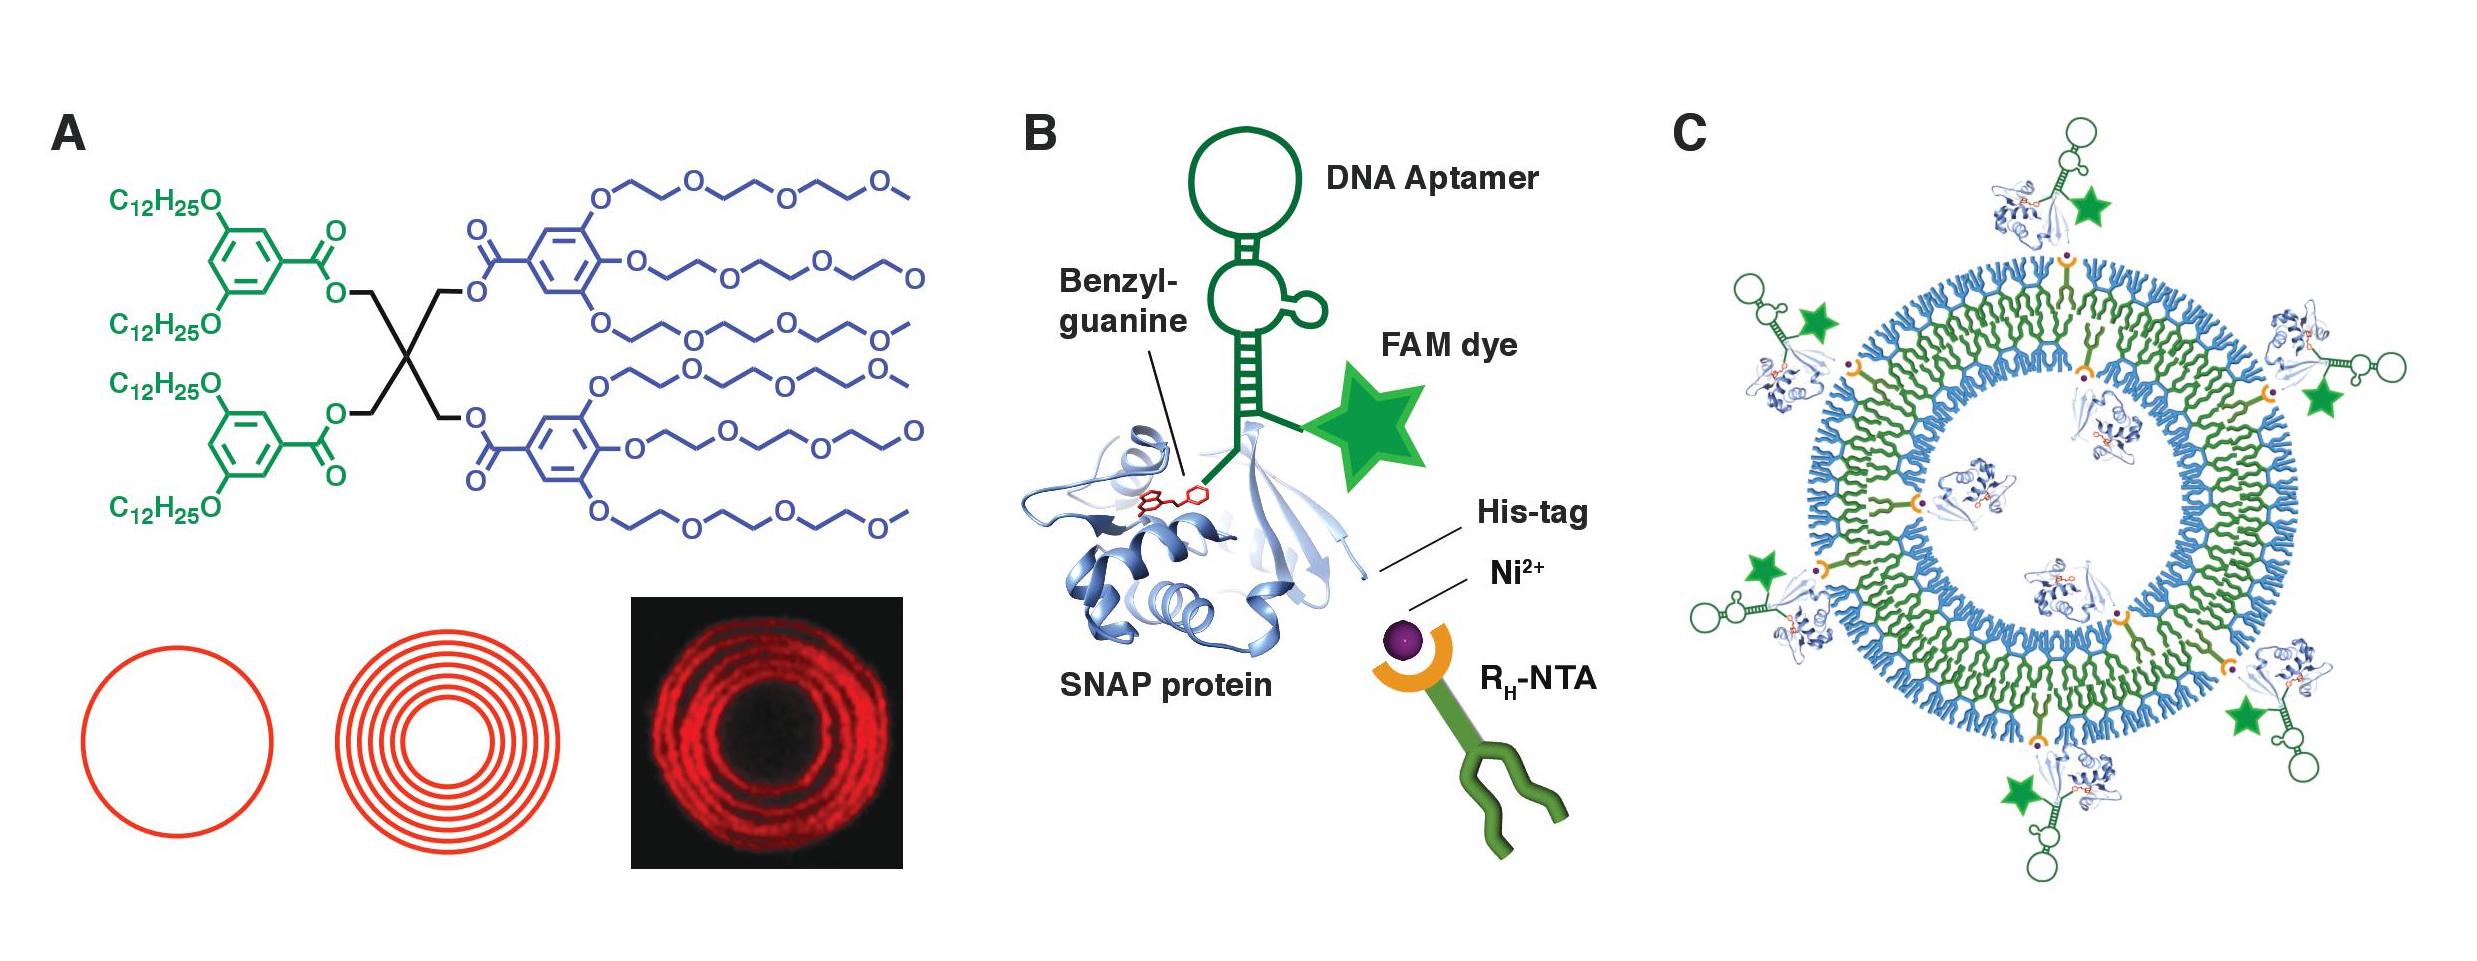 Far left is chemical with phenol rings and long carbon chains, underneath are red circles showing the onion-like structure. Center panel shows a protein structure with a fluorescent tag marked by a green star, labeled with benzyl-guanine, SNAP protein, DNA Aptamer, FAM dye, His-tag, NI2+, and RH-NTA. Last figure shows the same protein in the center replicated many times to form a circular structure.